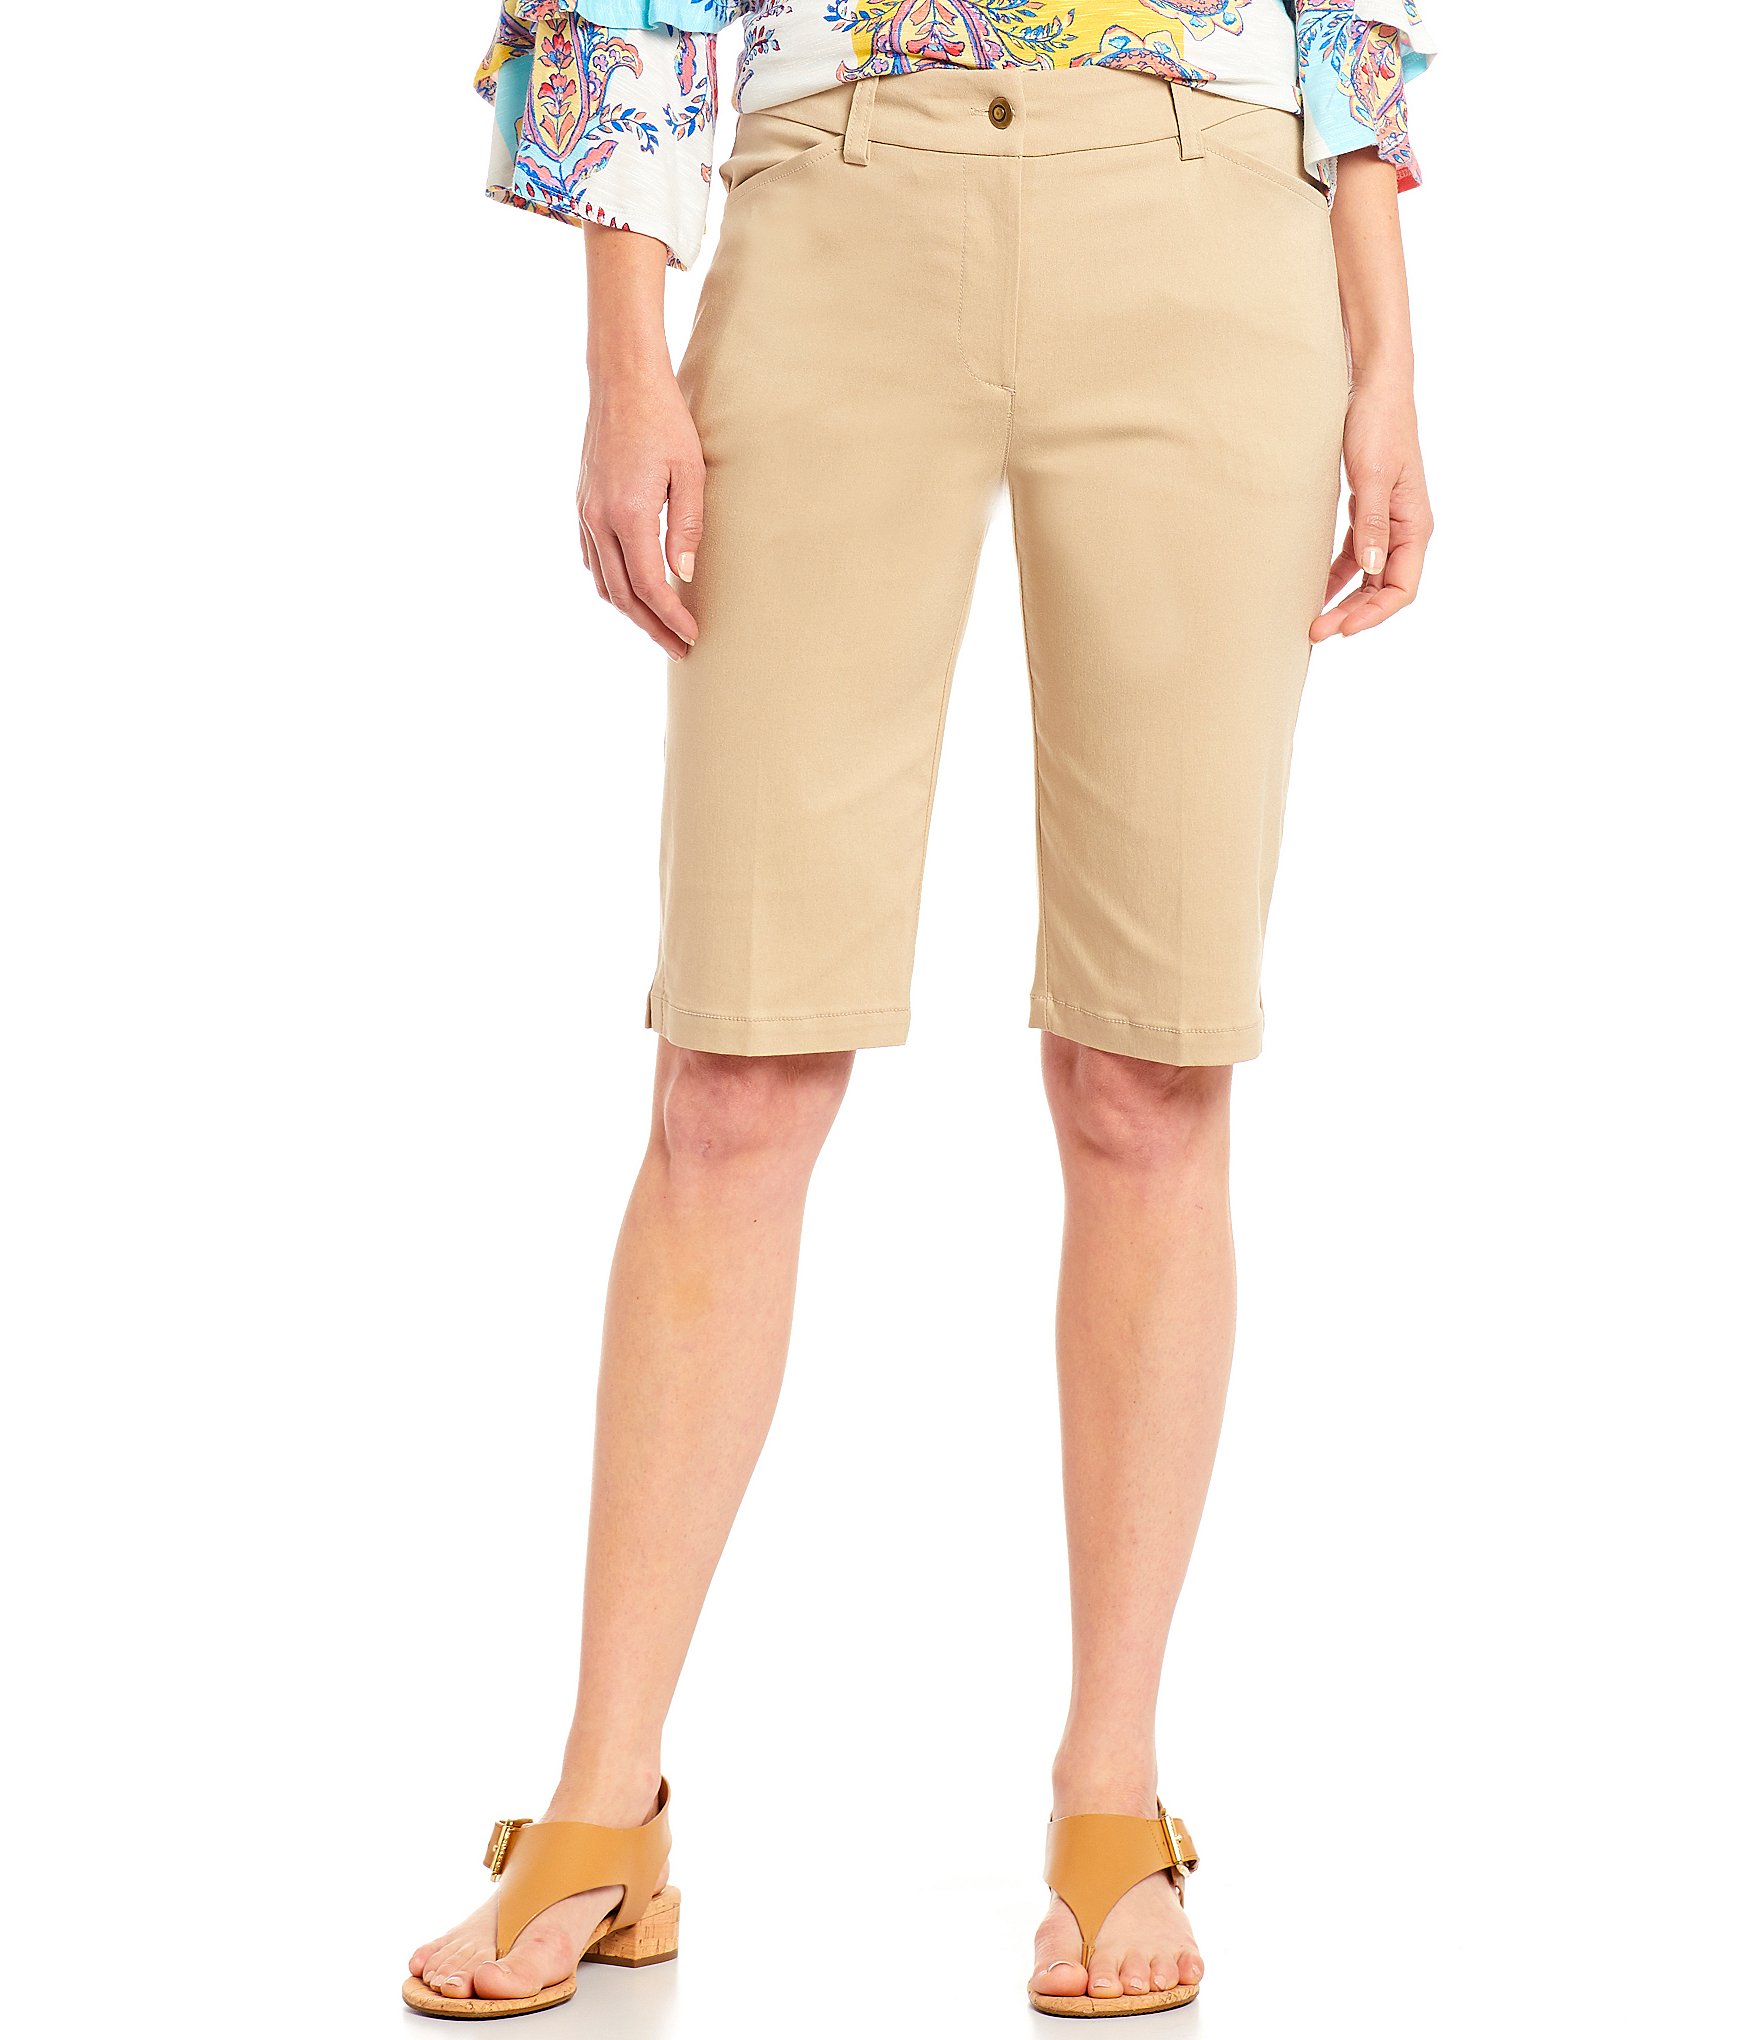 Nantucket Reds Collection® Ladies Bermuda Shorts - Murray's Toggery Shop